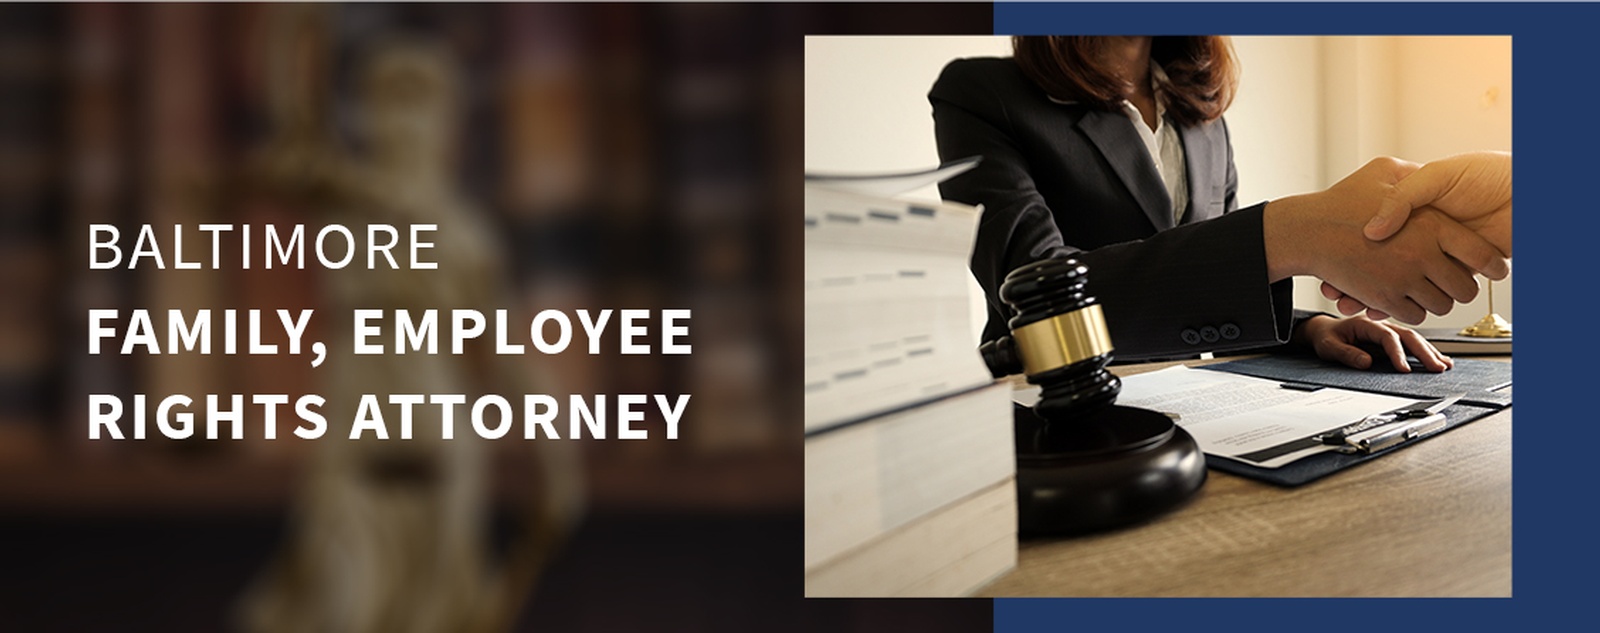 MOSSON LAW, LLC EMPLOYMENT & FAMILY LAW ATTORNEY SERVING BALTIMORE, MD